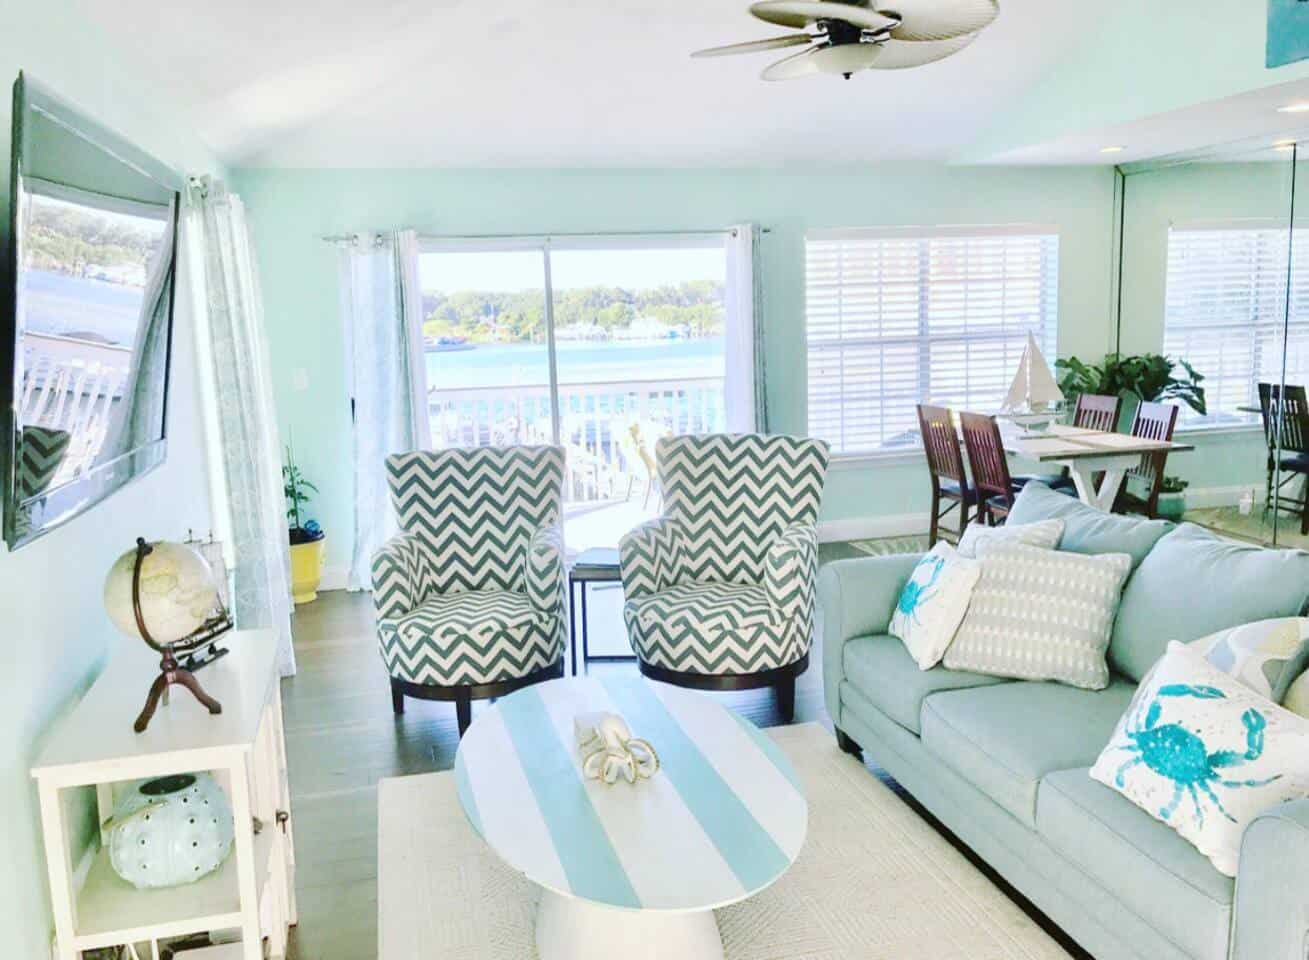 Image of Airbnb rental in Destin